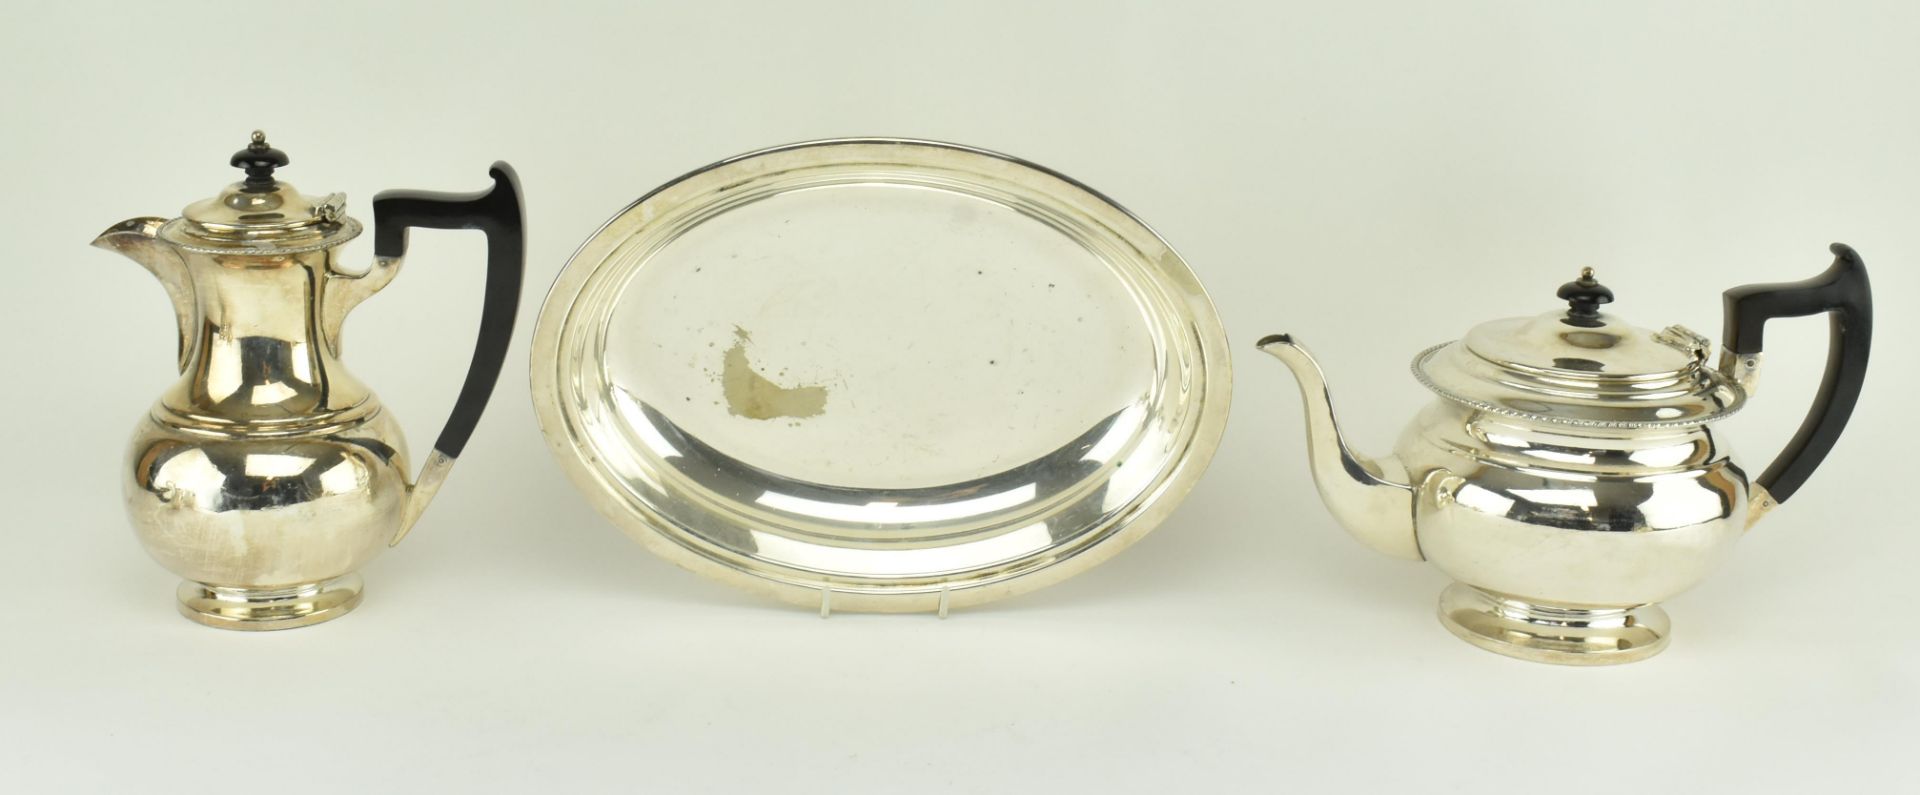 COLLECTION OF EDWARDIAN & LATER SILVER PLATED TABLEWARE - Image 5 of 10